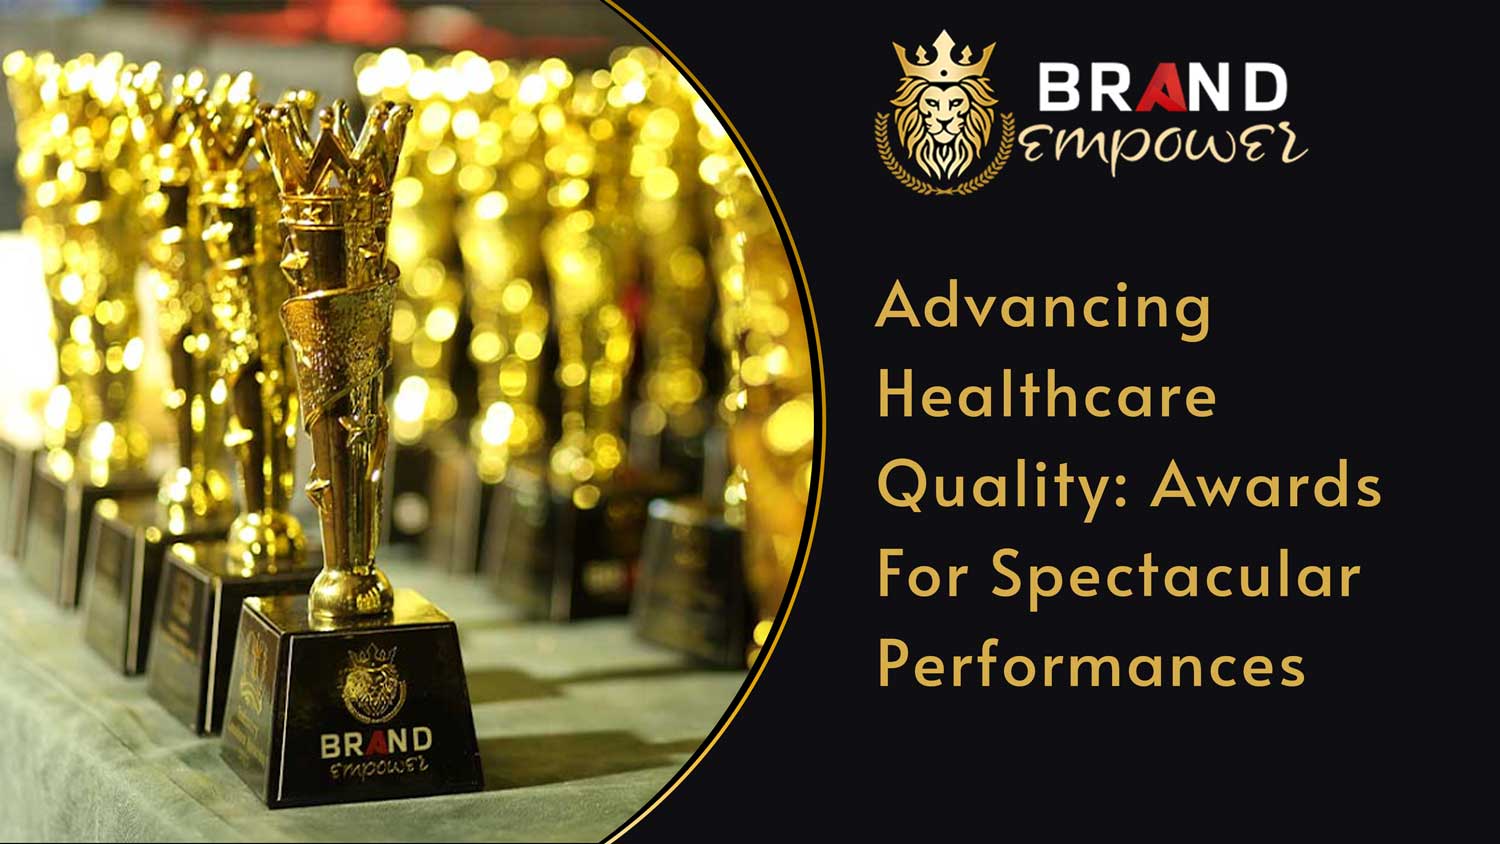 Advancing Healthcare Quality Awards For Spectacular Performances